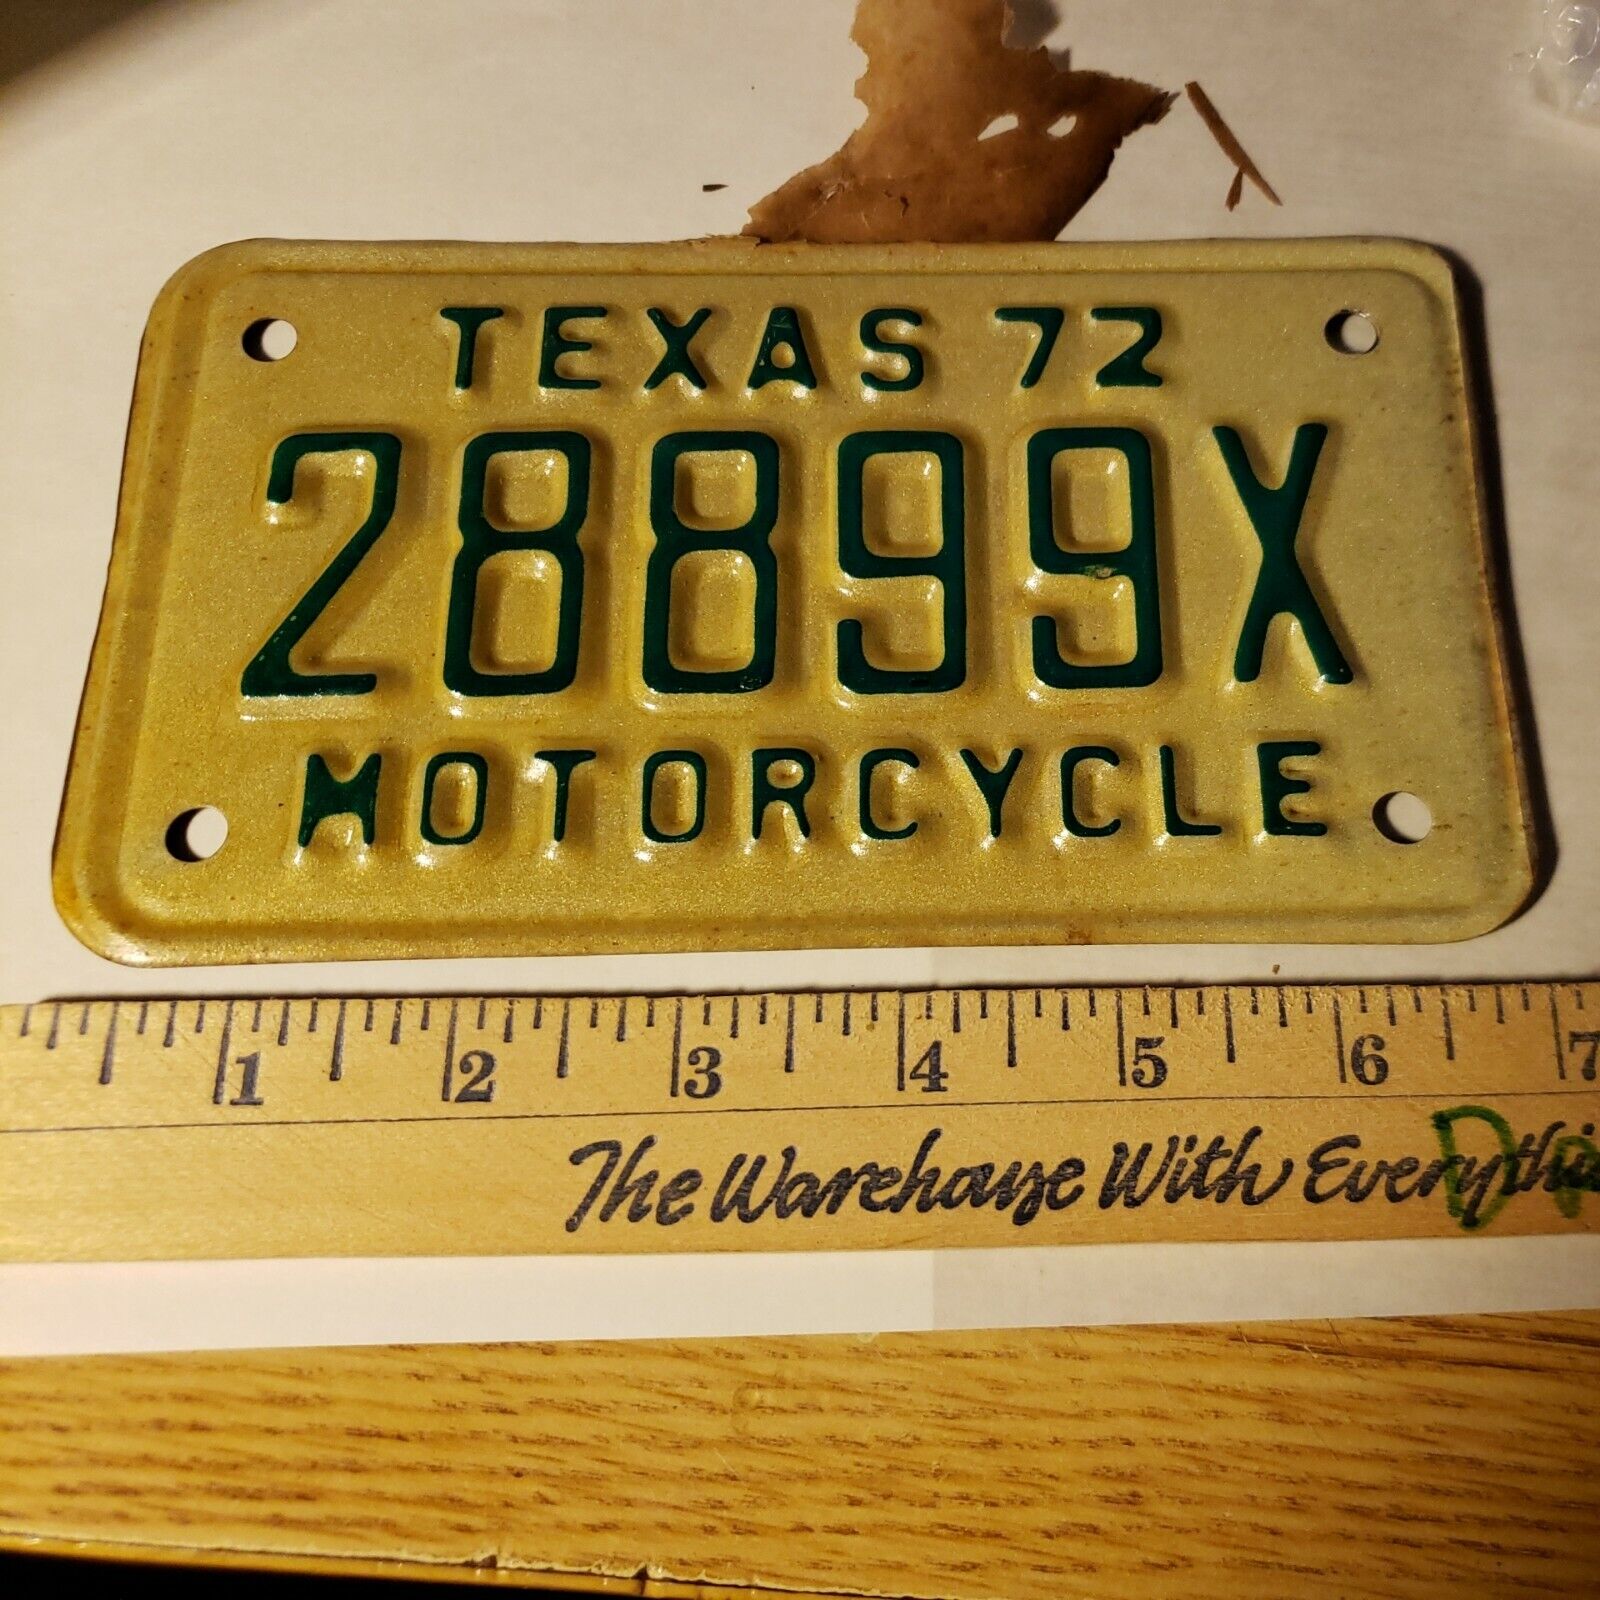 1972 TX TEXAS Motorcycle License Plate 28899X - Green NOS Harley Bike cycle 72